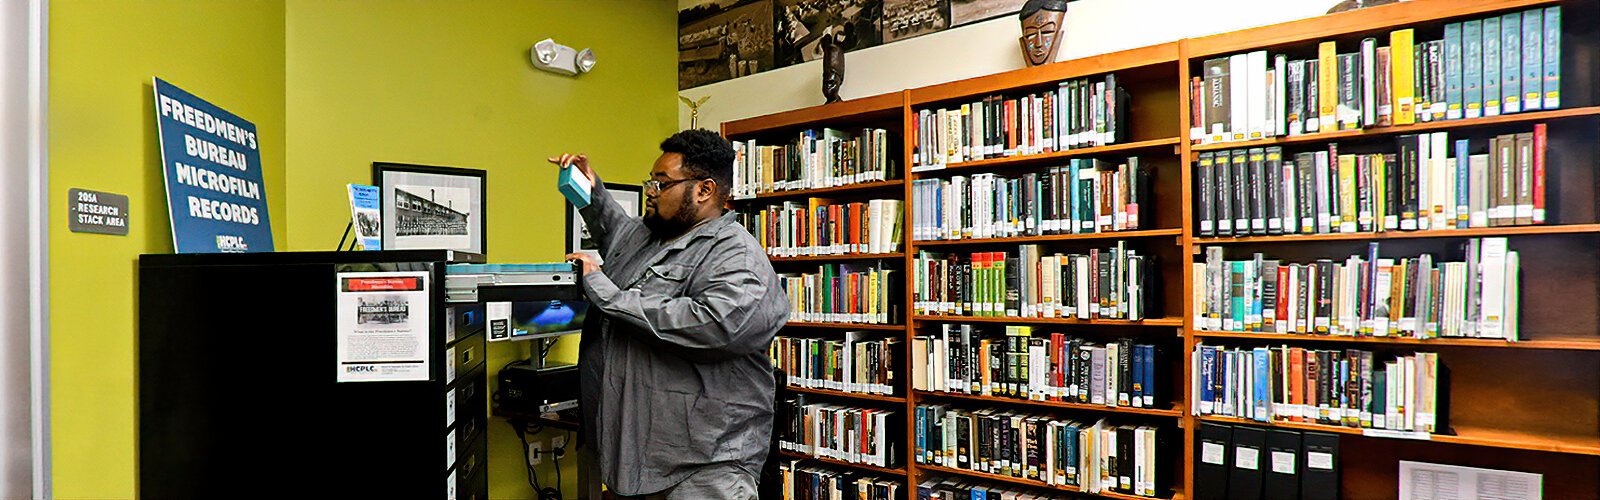  Supervisory Librarian Shedriek Battle picks out a microfilm from the Freedmen’s Bureau microfilm records at the Robert W. Saunders, Sr. Public Library. The library has the largest genealogy collection in the Southeast.